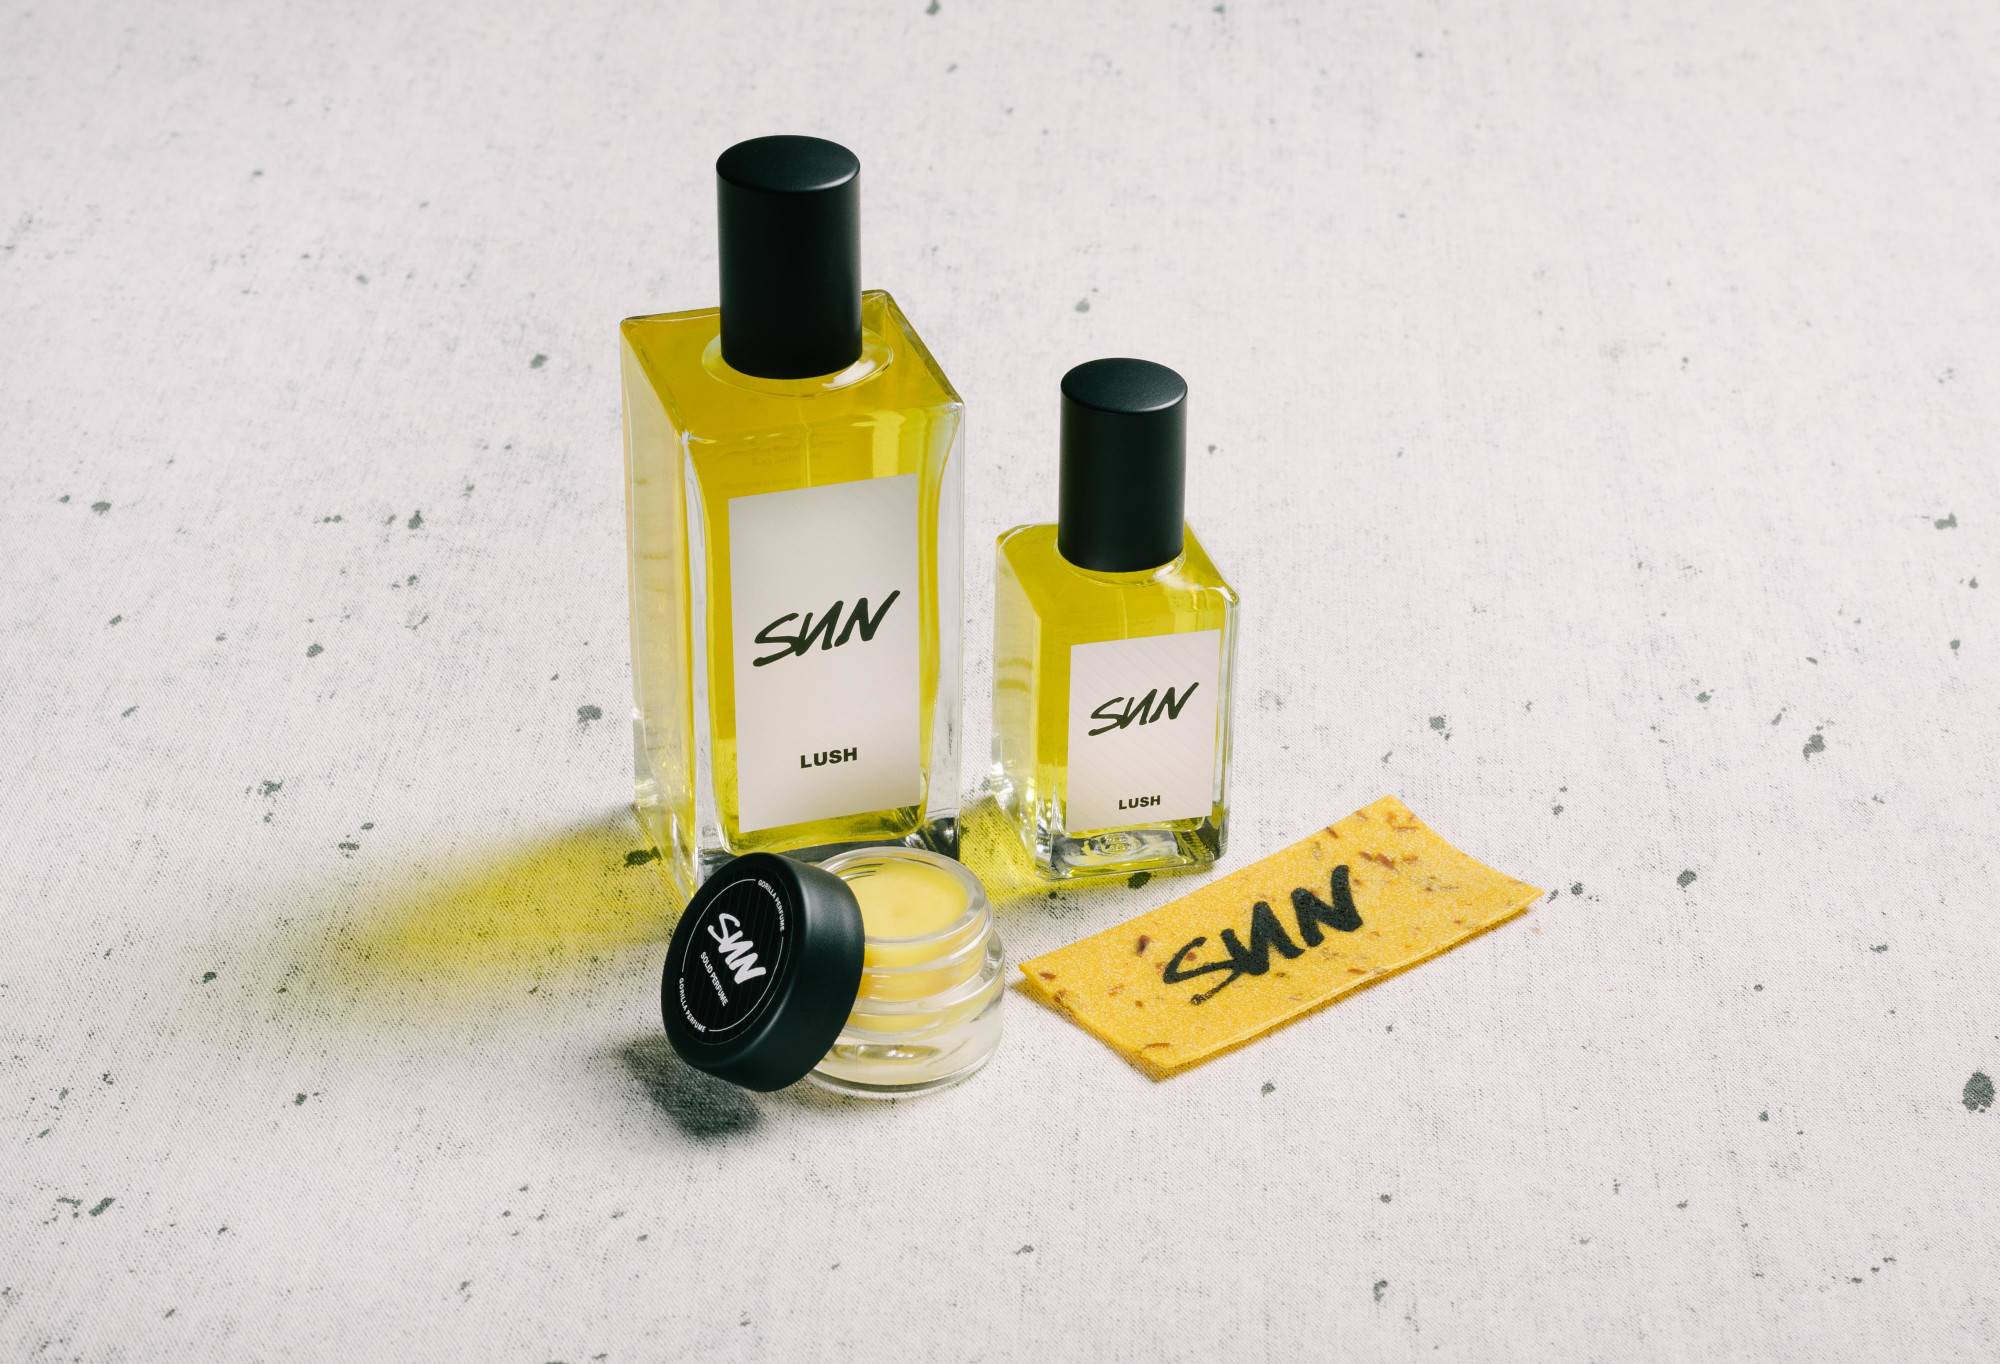 The whole Sun fragrance collection is displayed on a white surface, flecked with grey.